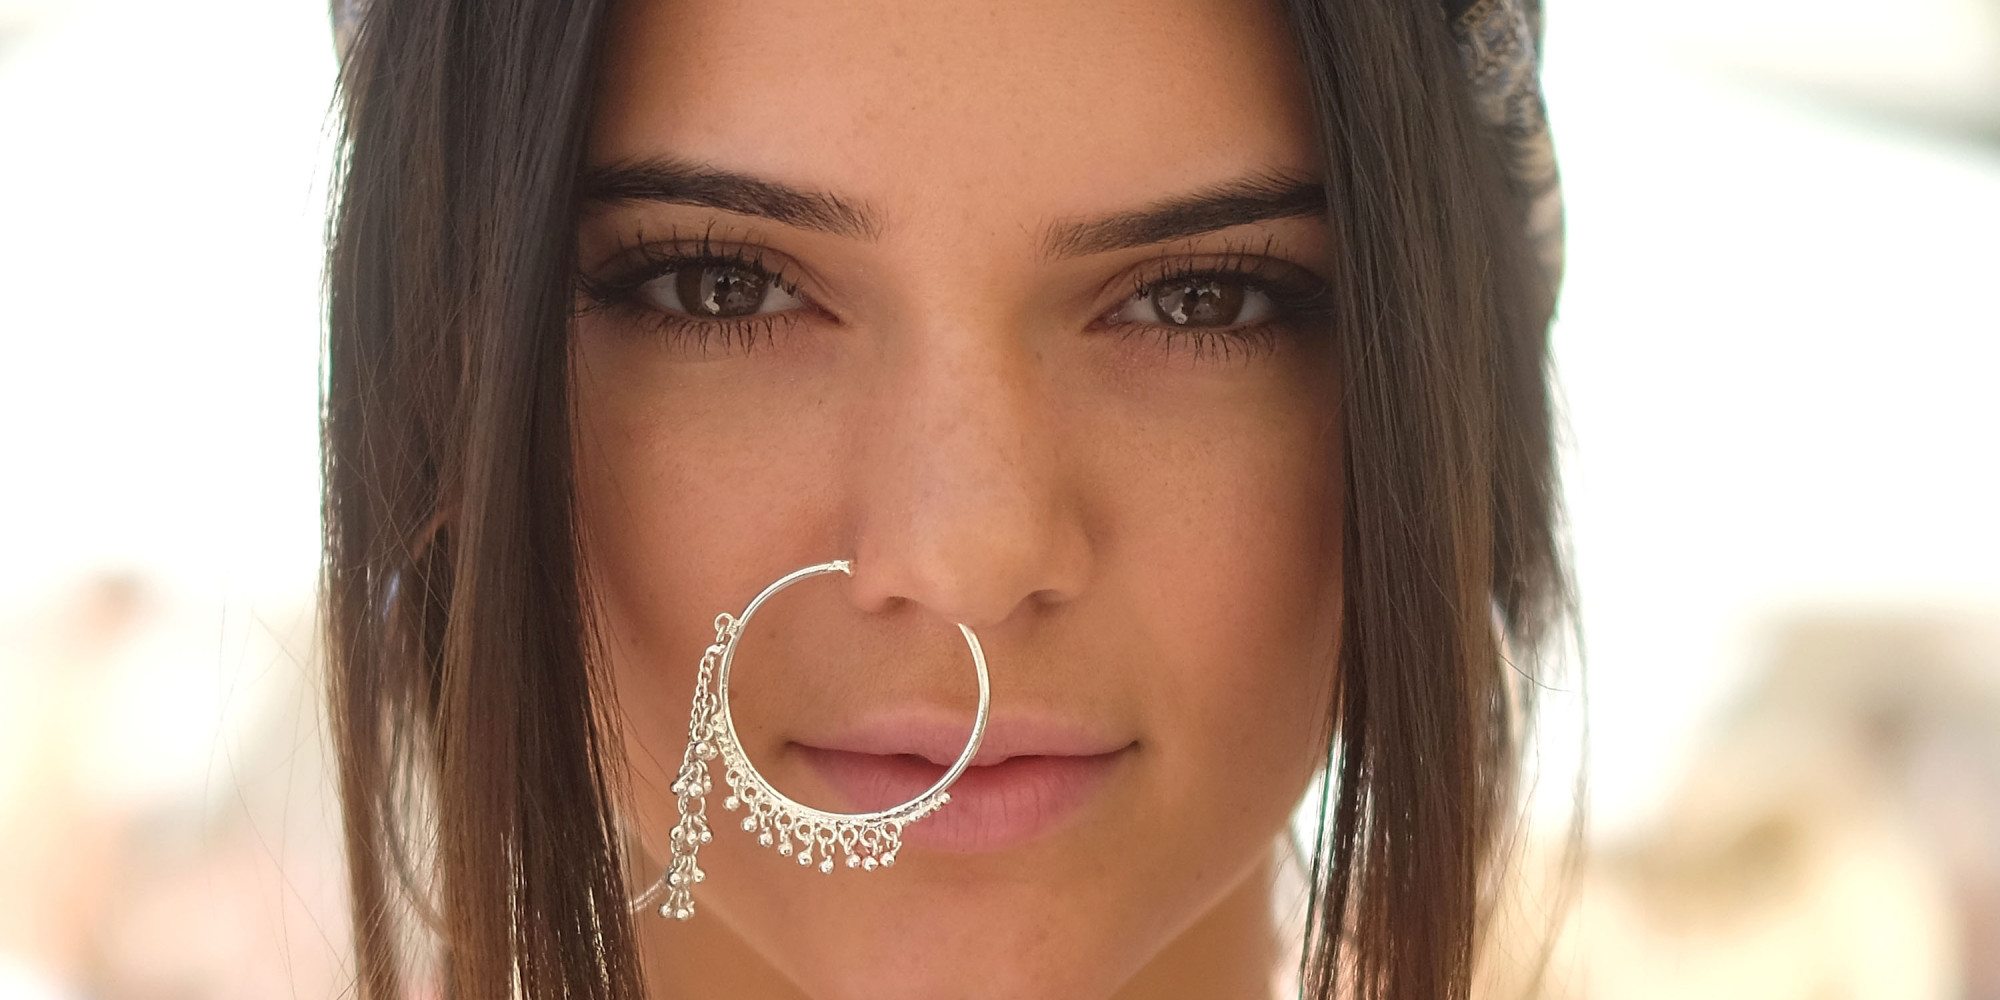 Kendall Jenner S Giant Nose Ring Is So Coachella It Hurts